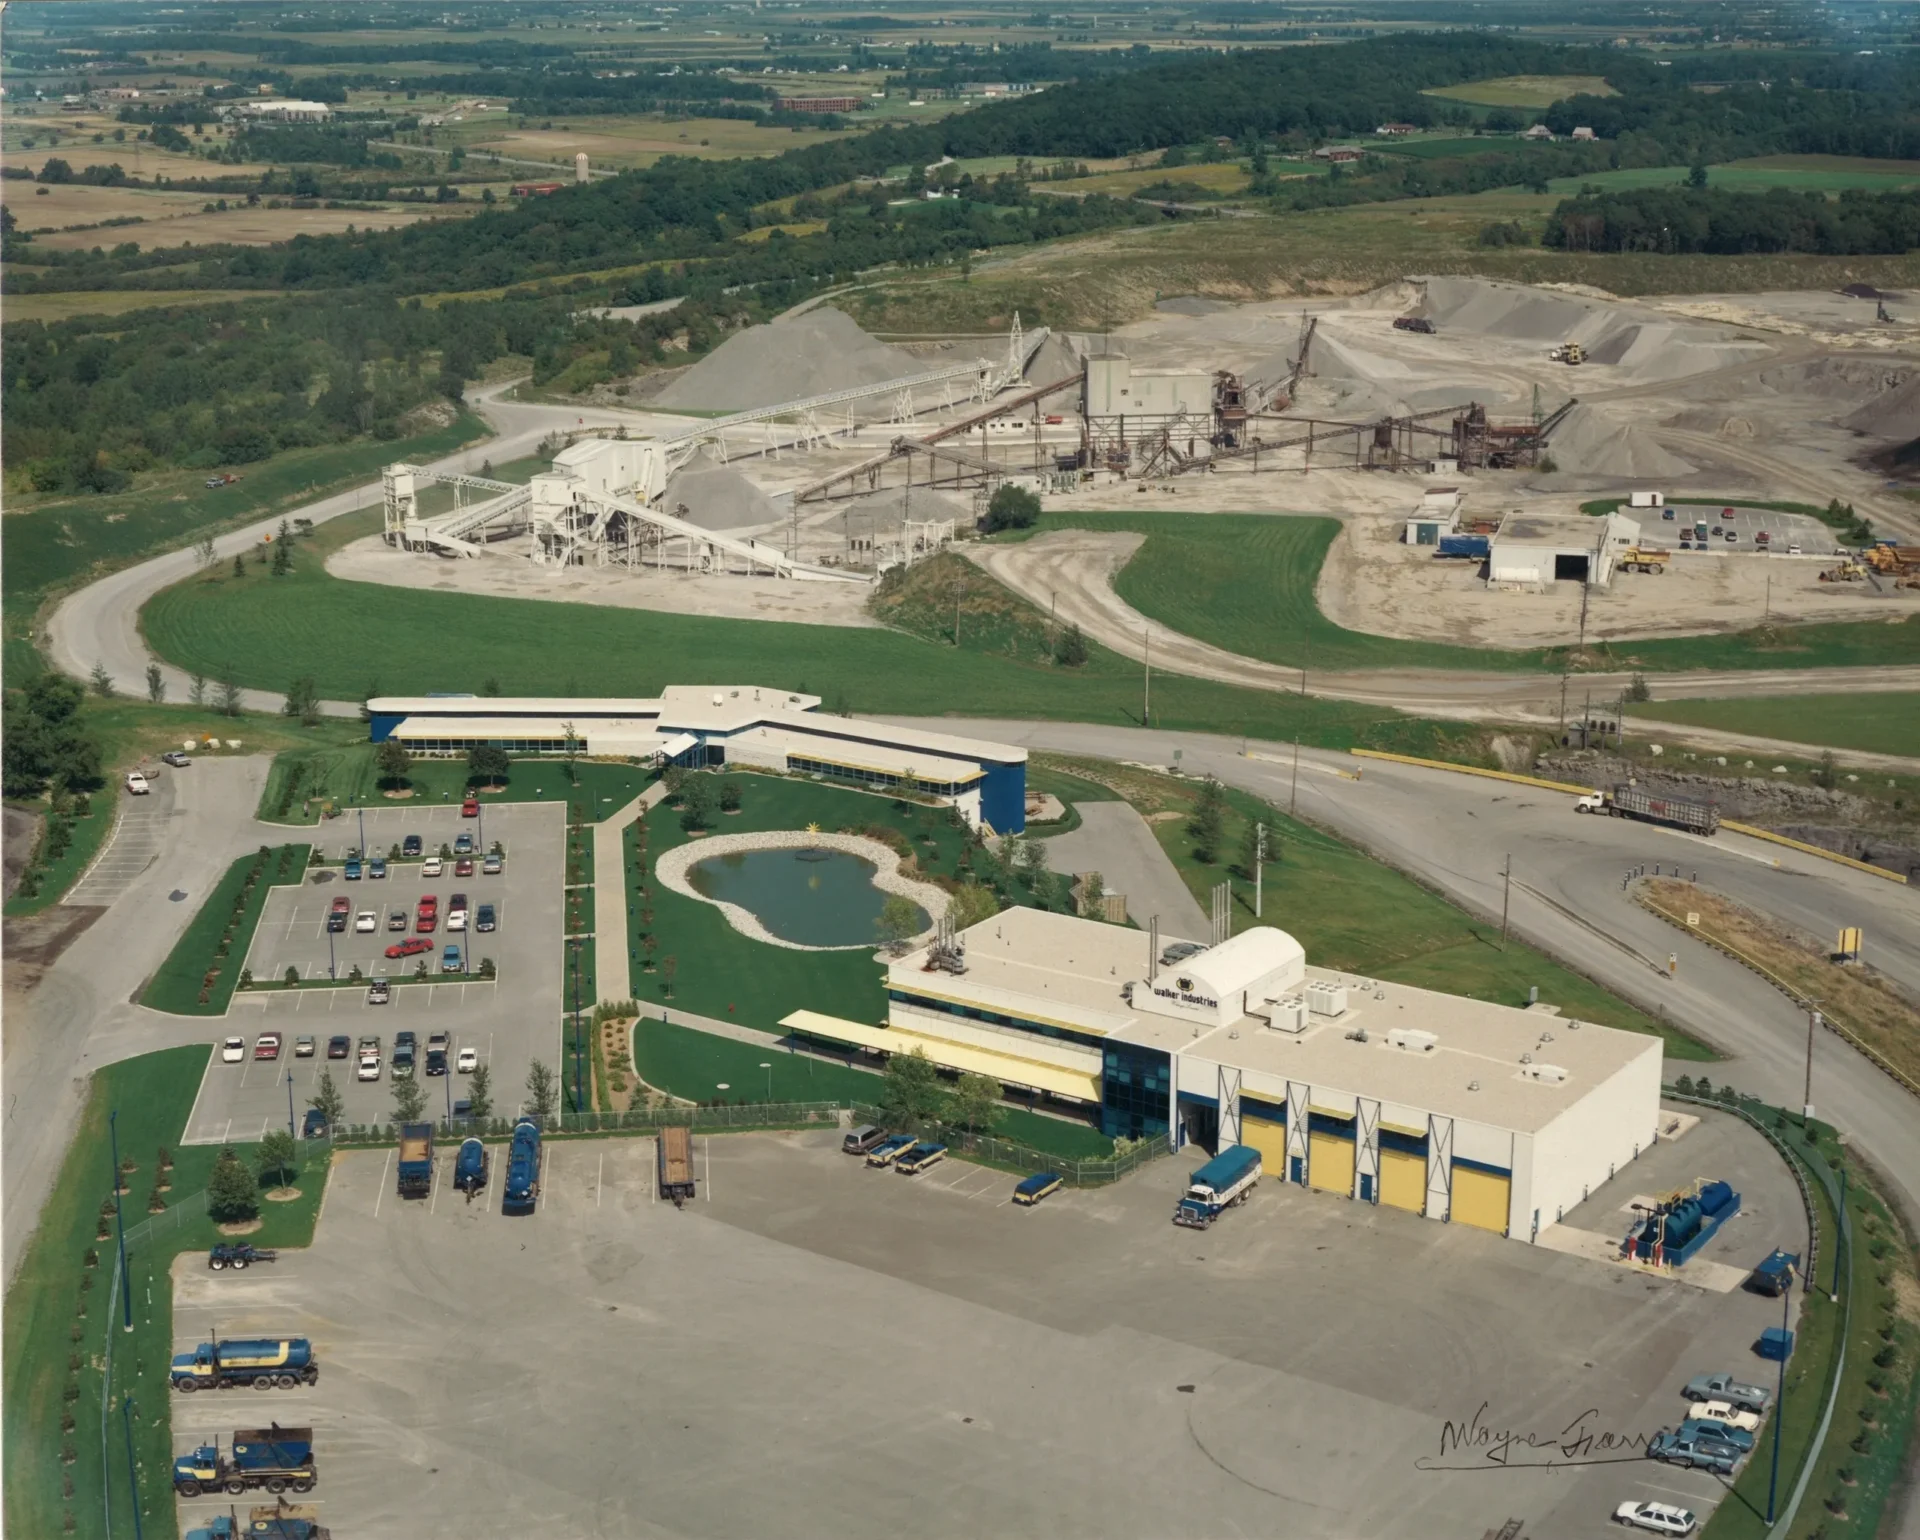 An aerial view of a large industrial area.